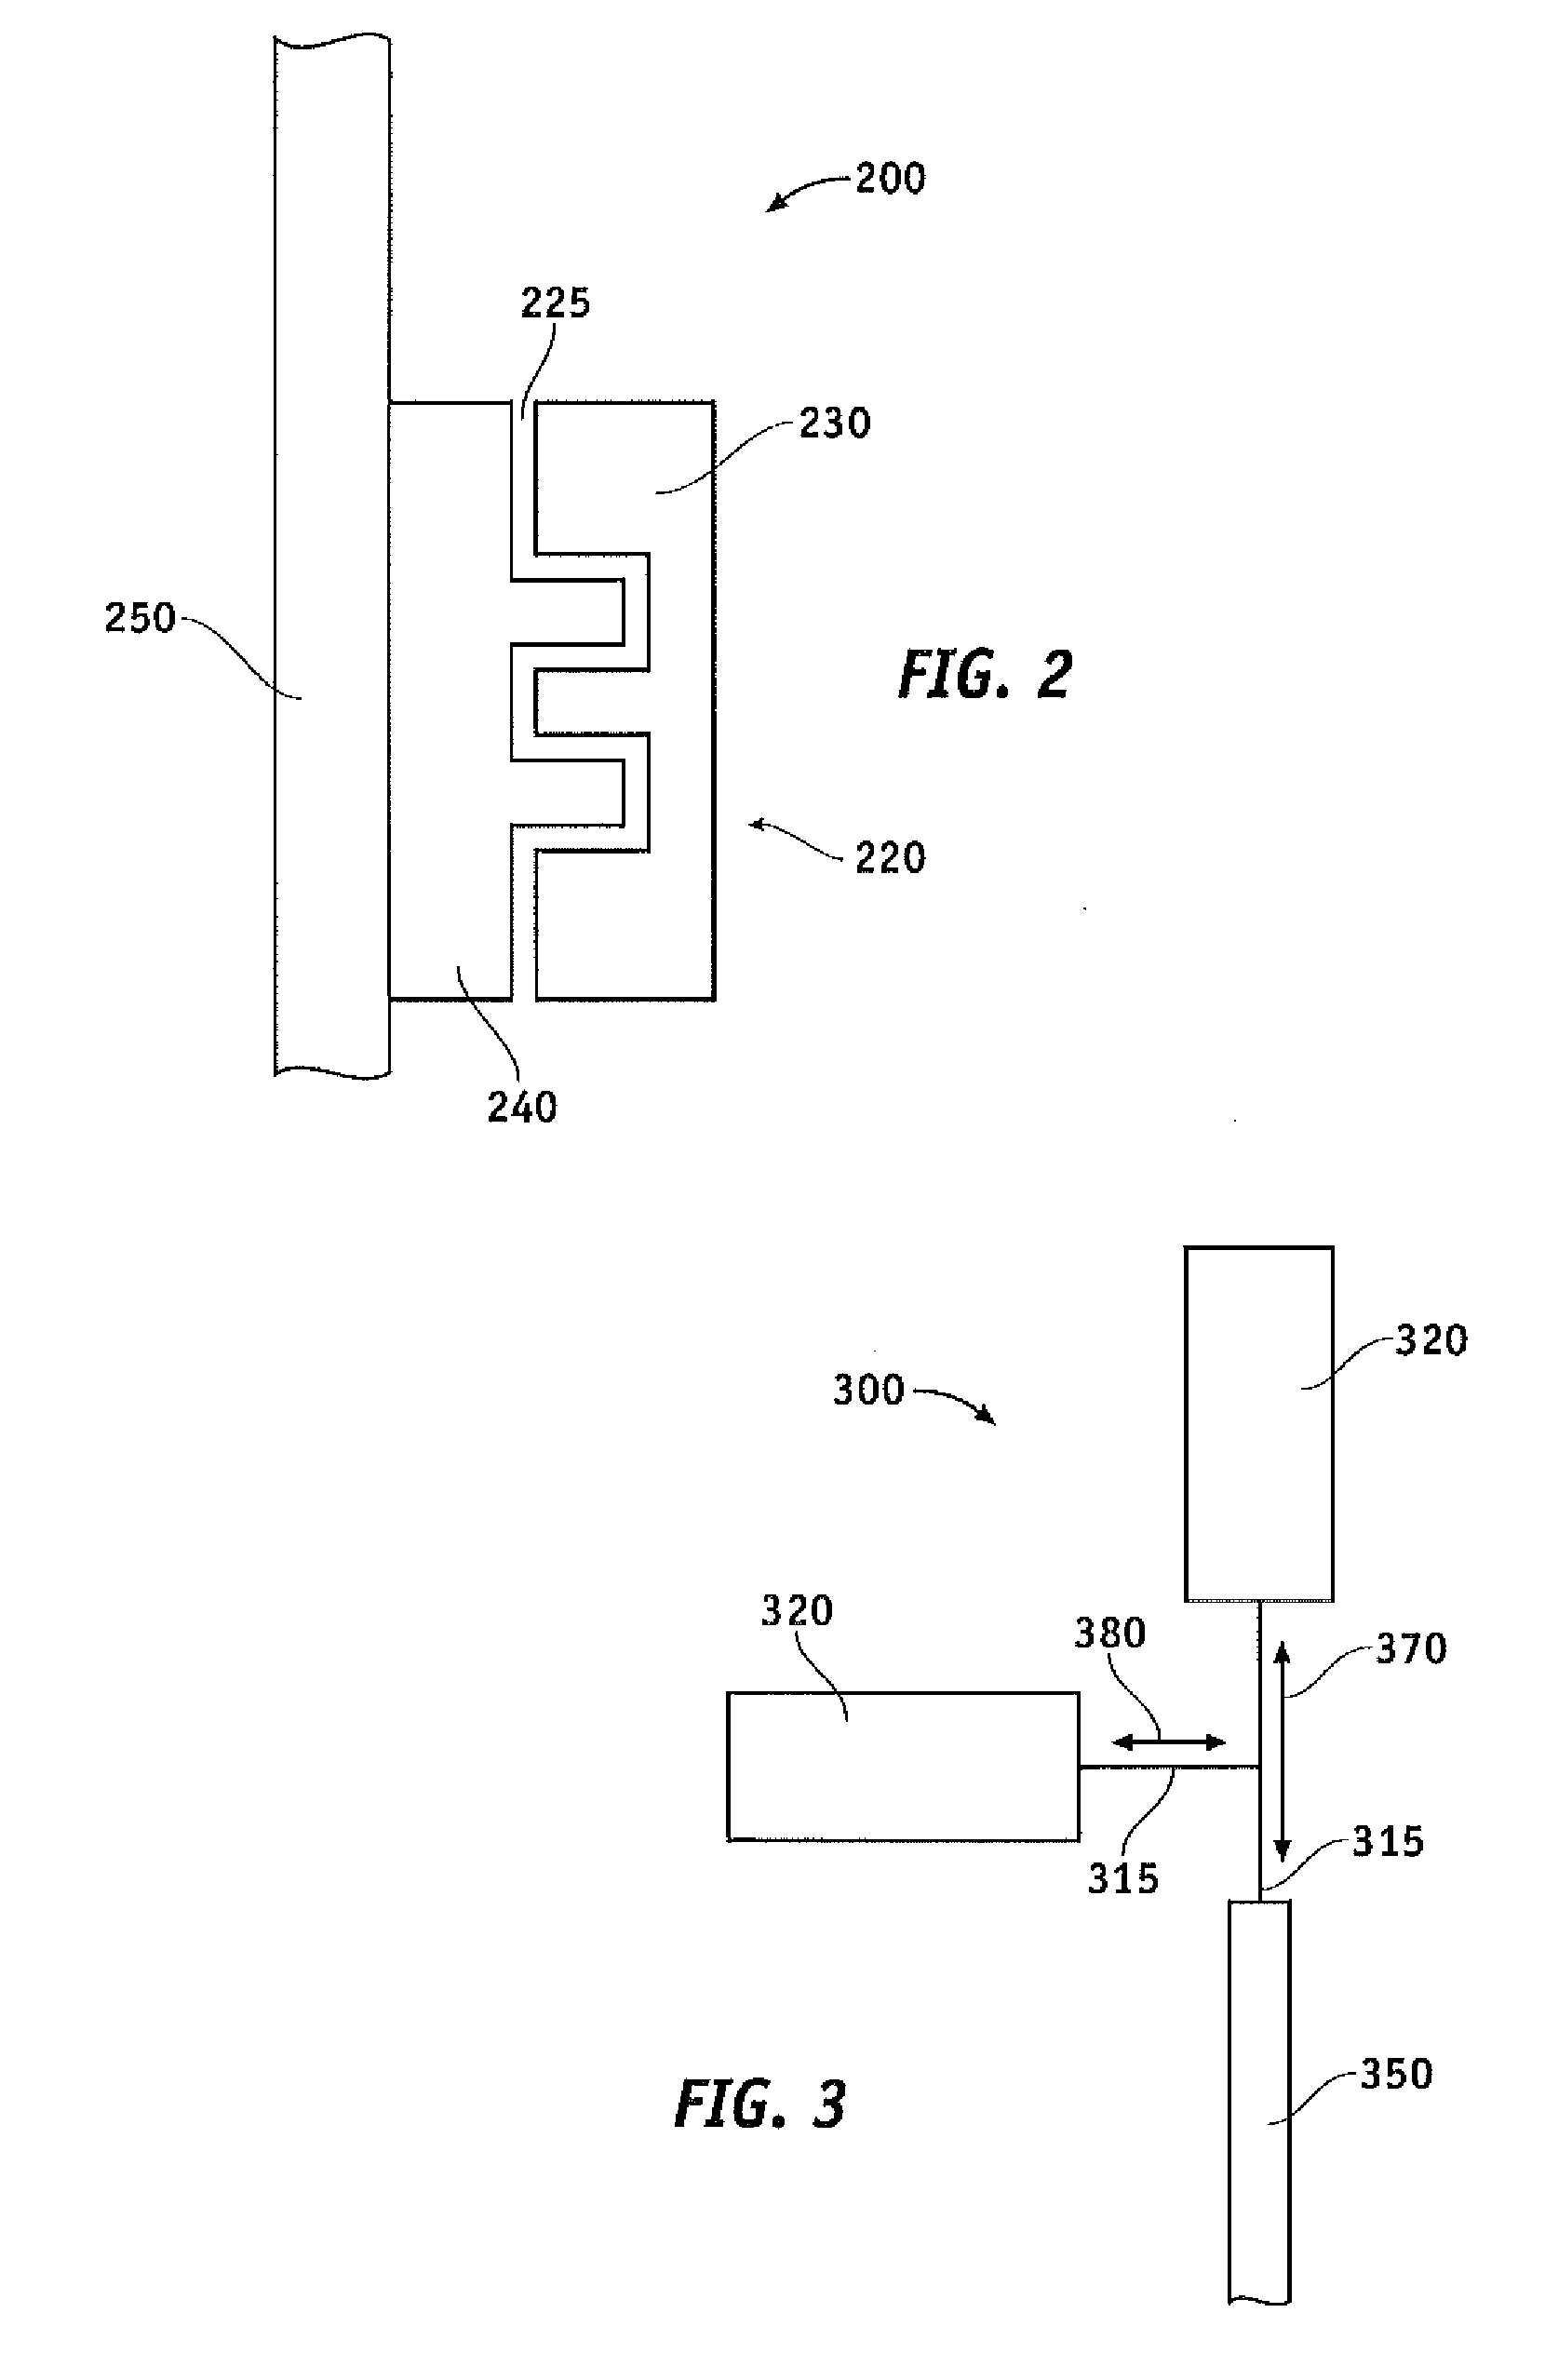 Method for using microelectromechanical systems to generate movement in a phacoemulsification handpiece